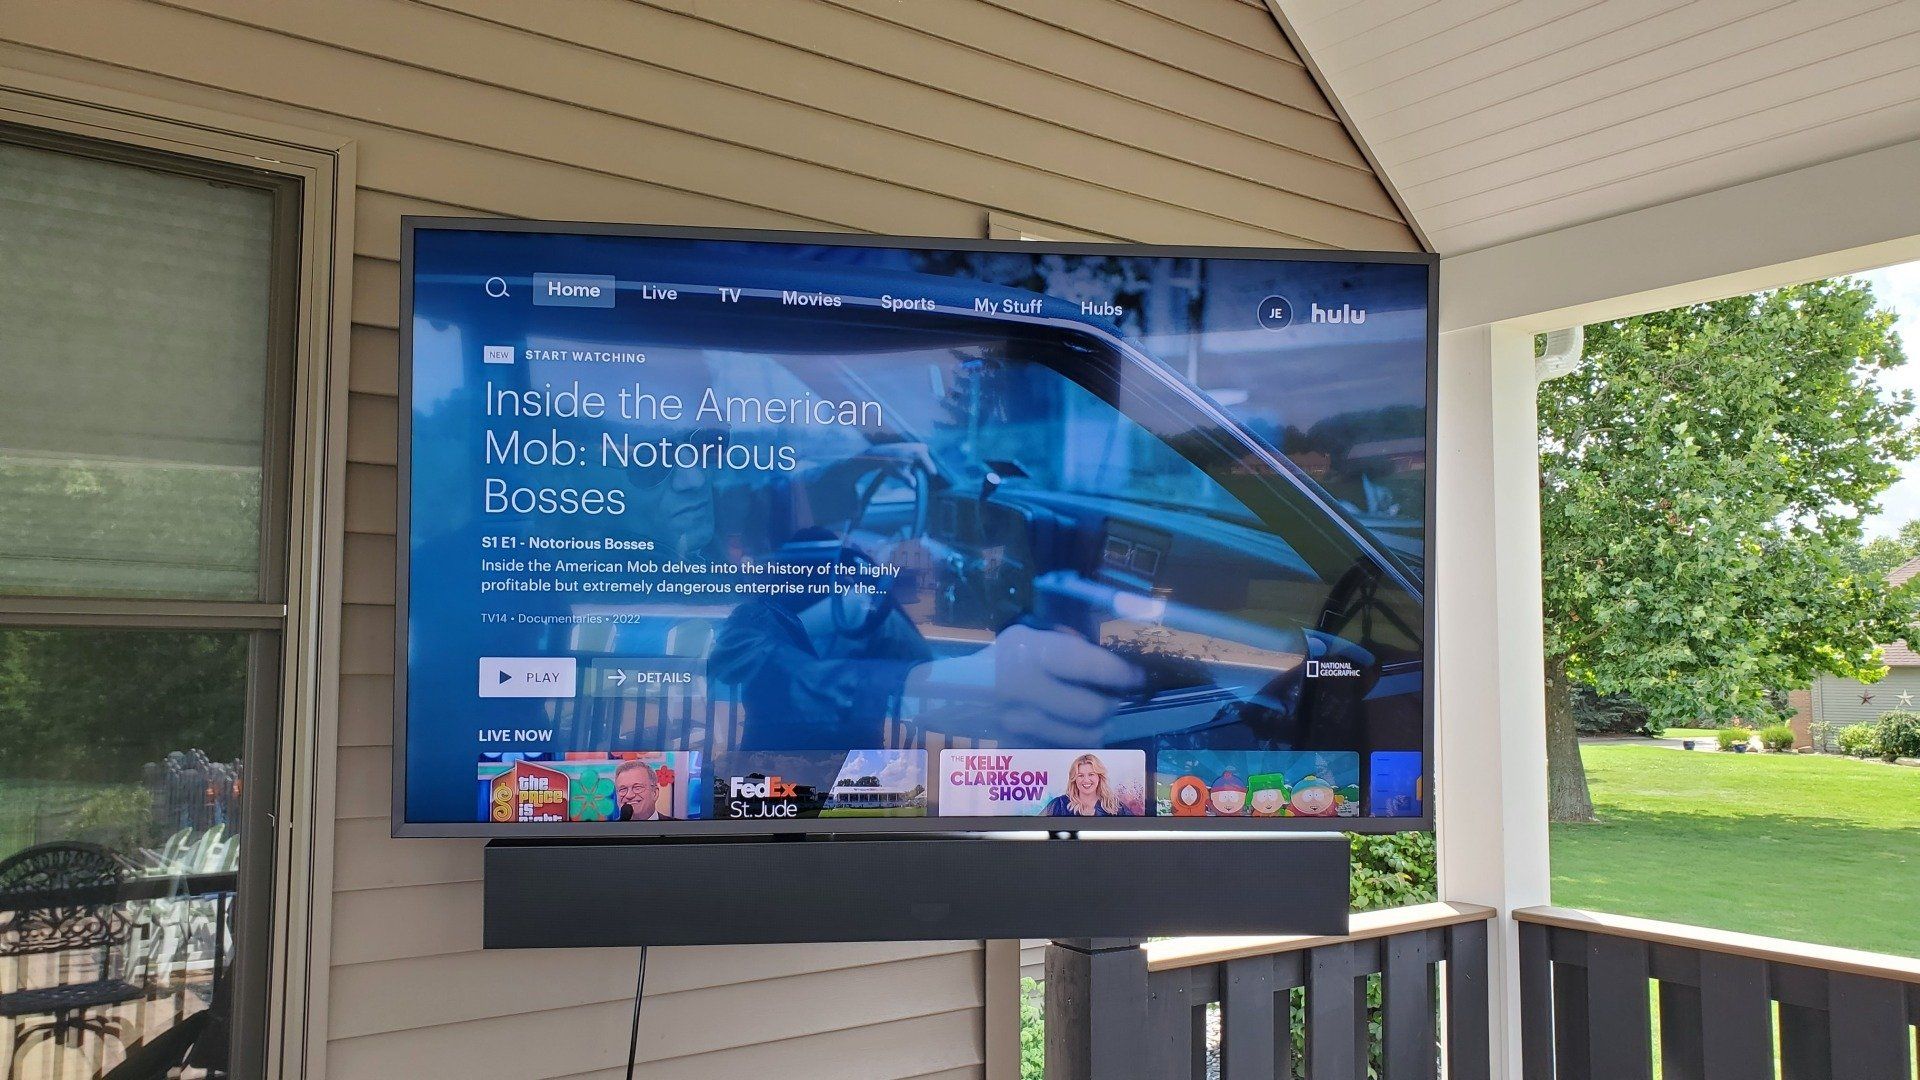 a samsung terrace outdoor television is mounted in a patio area with an outdoor soundbar below it